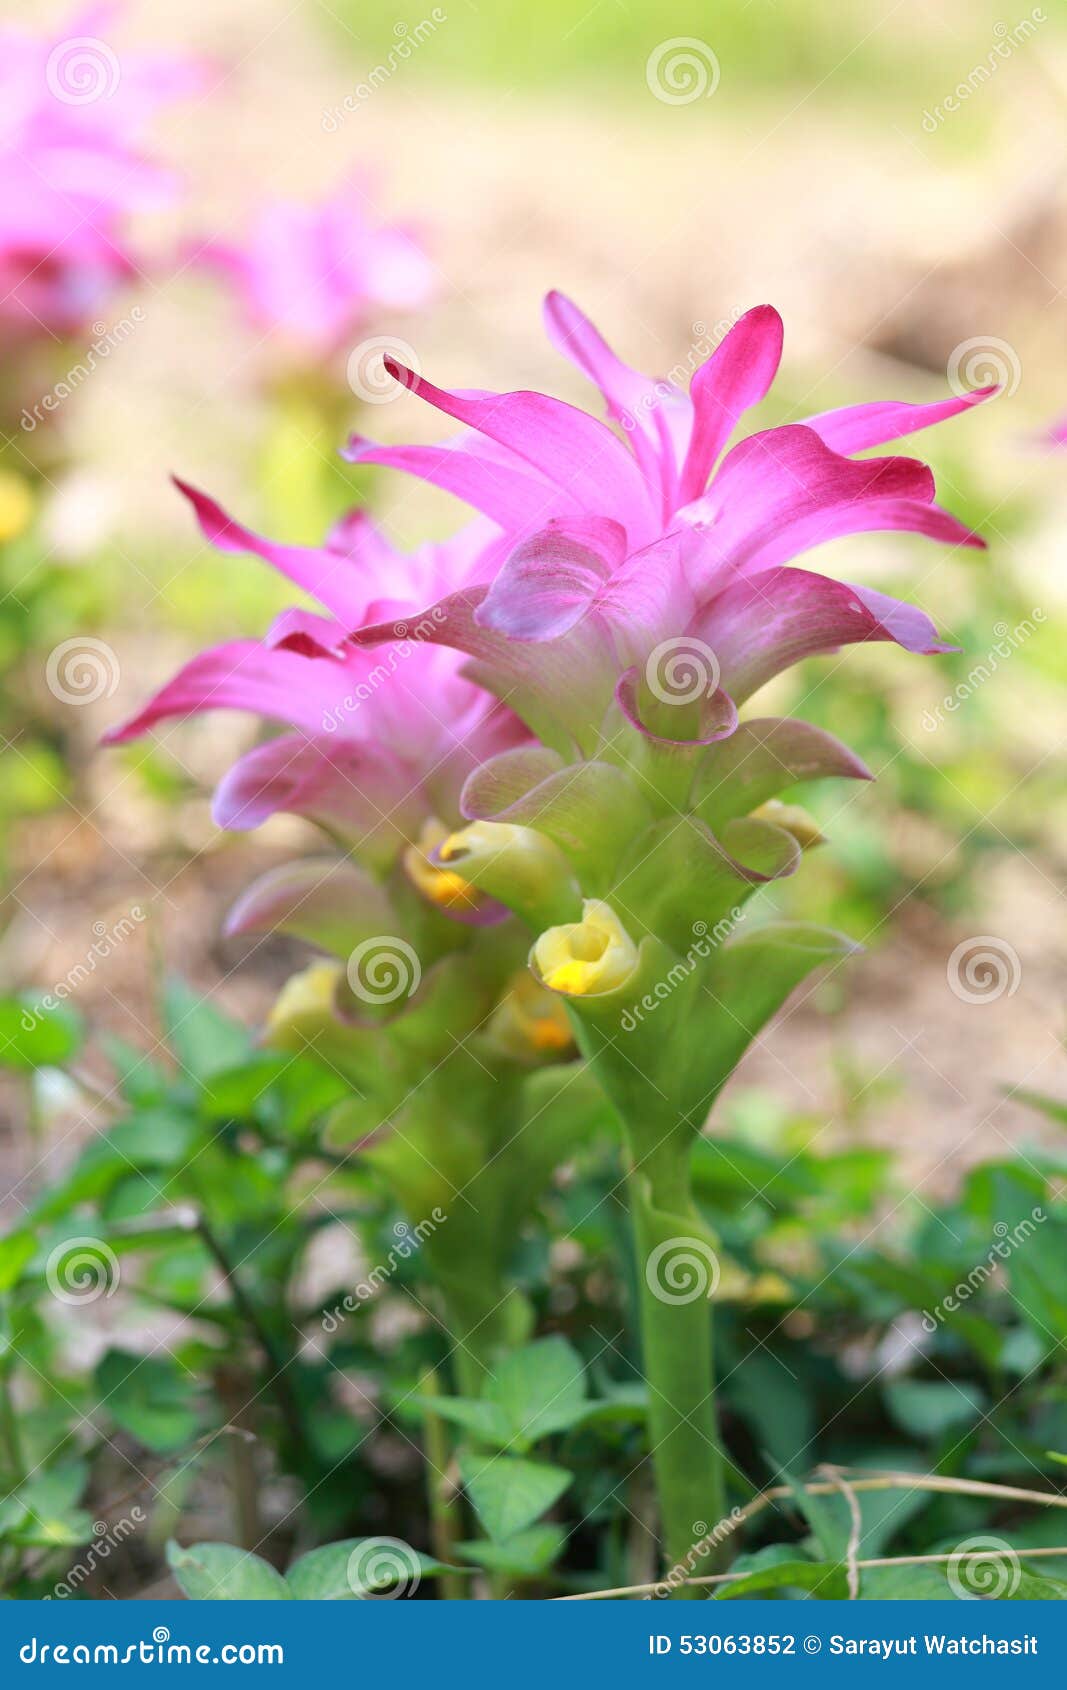 Turmeric flower stock photo. Image of temperatures, annually - 53063852